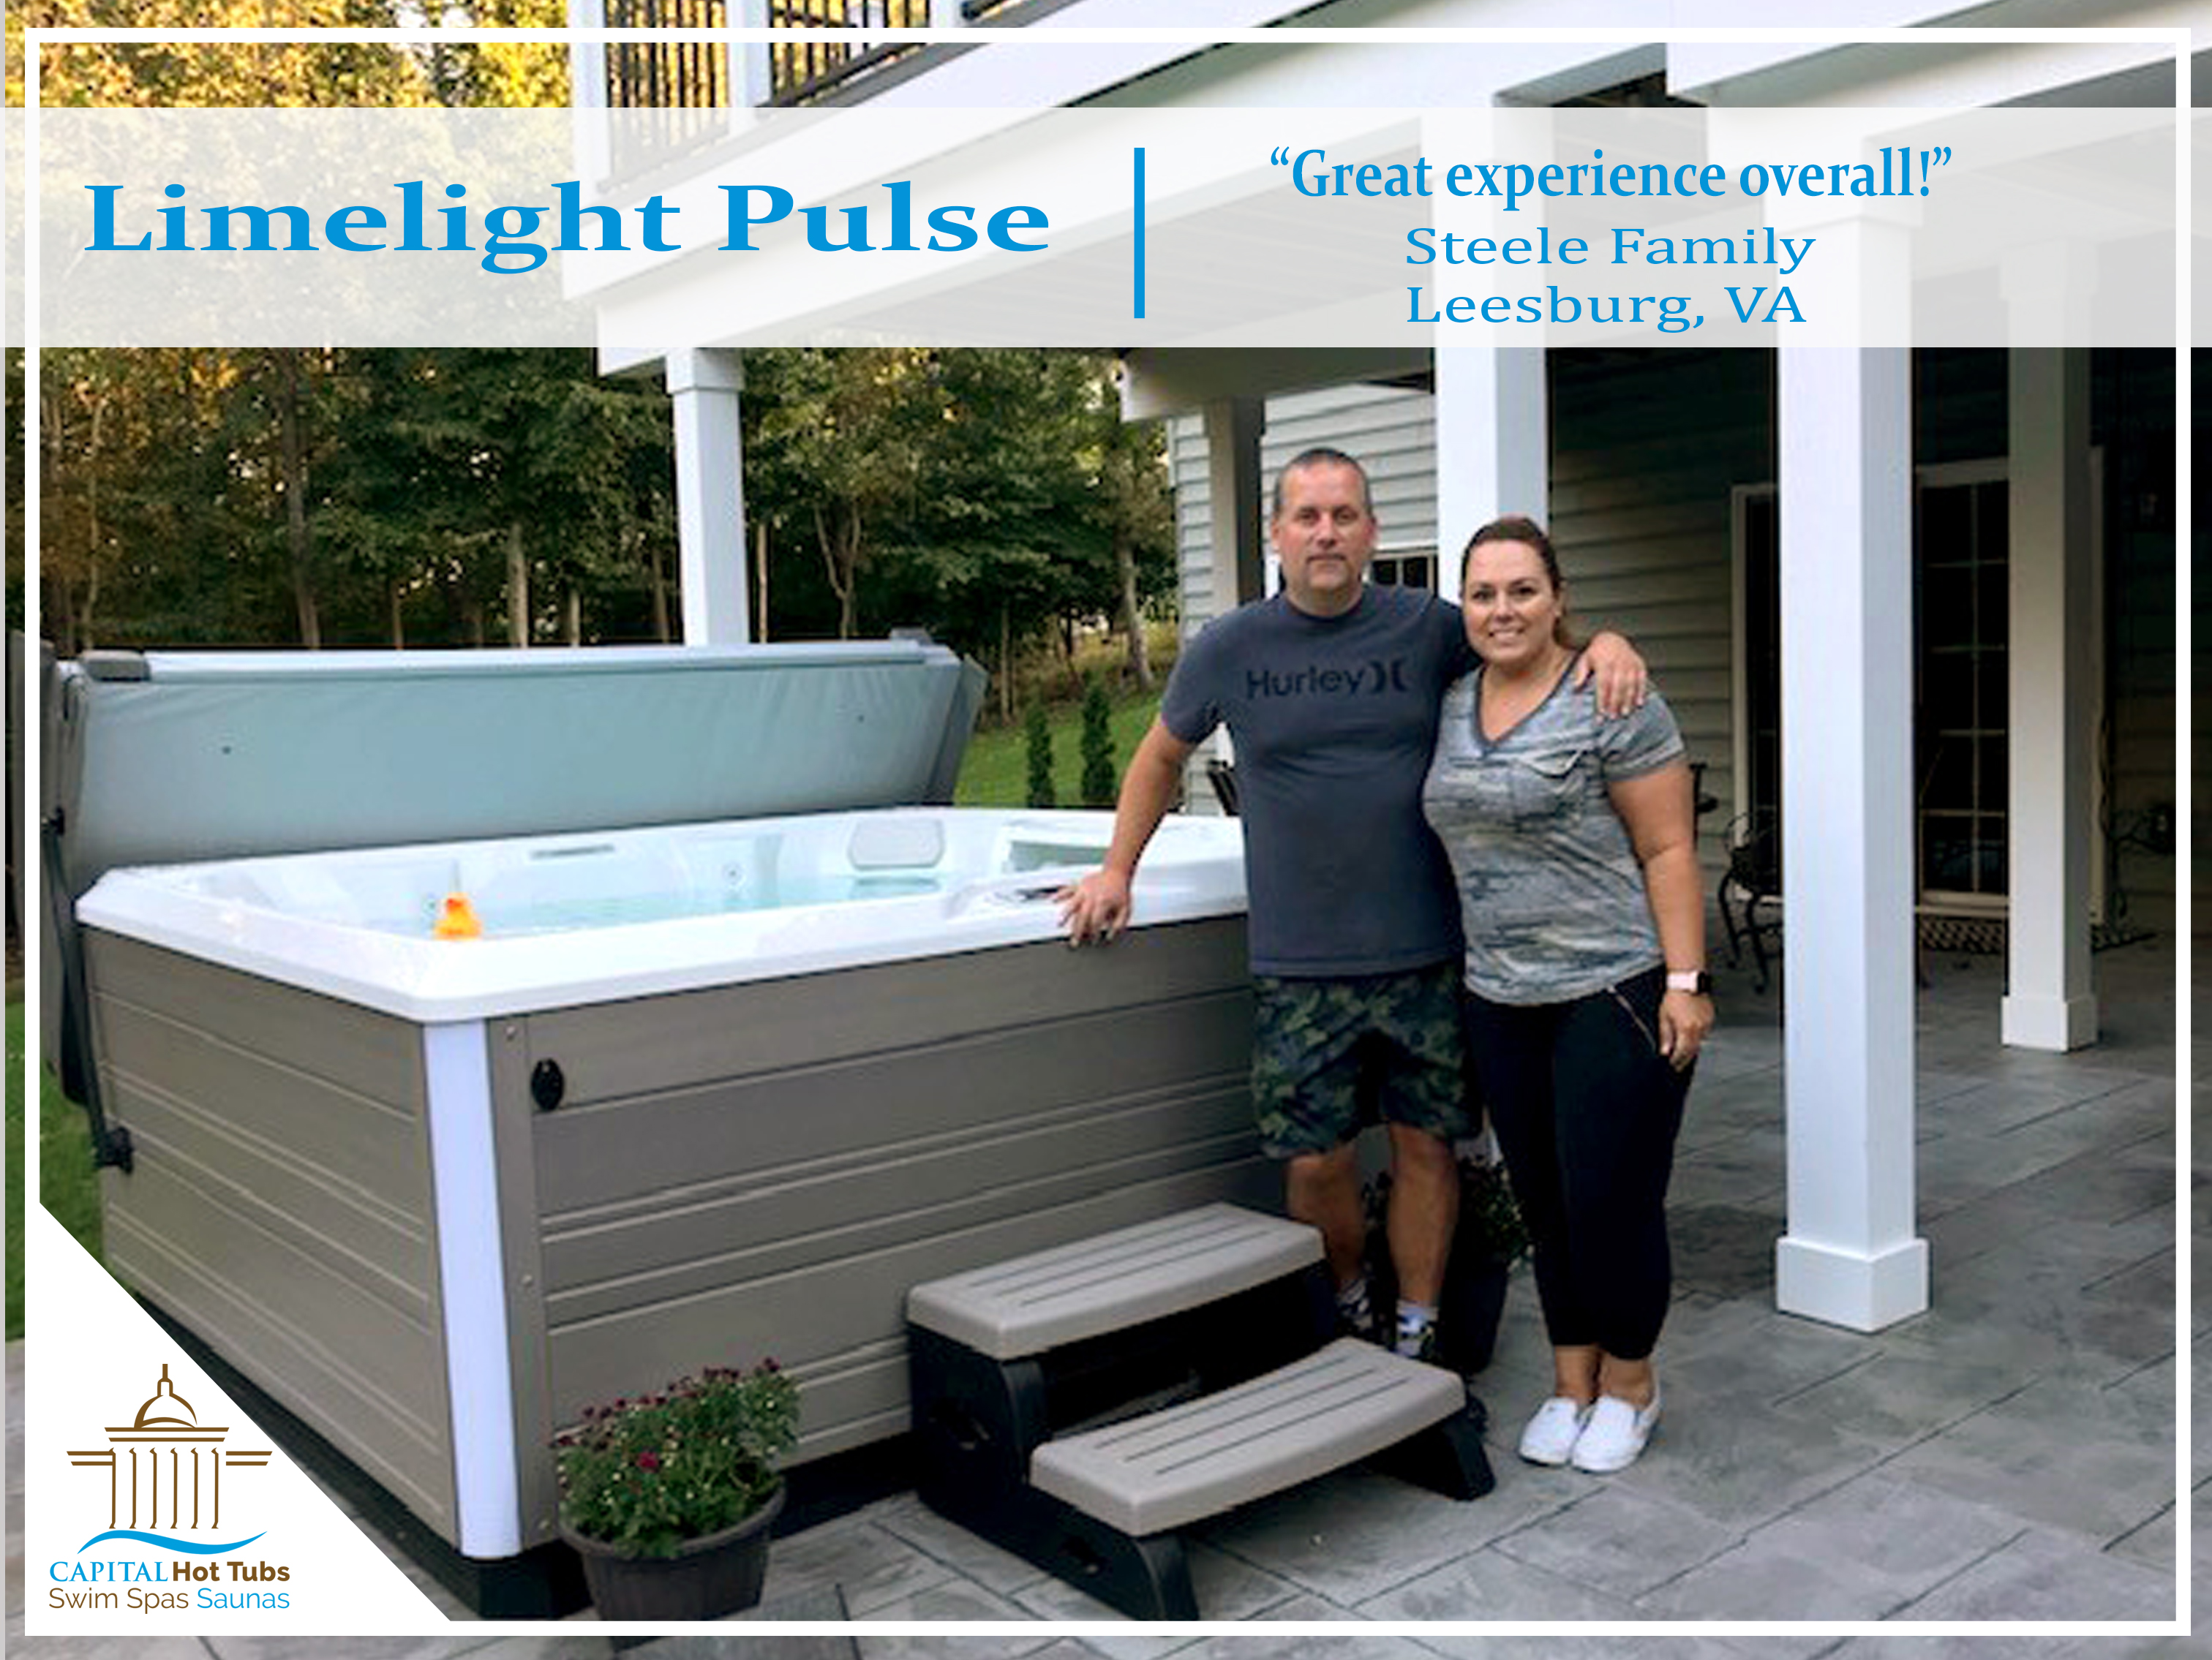 couple next to beautiful hot tub on back patio